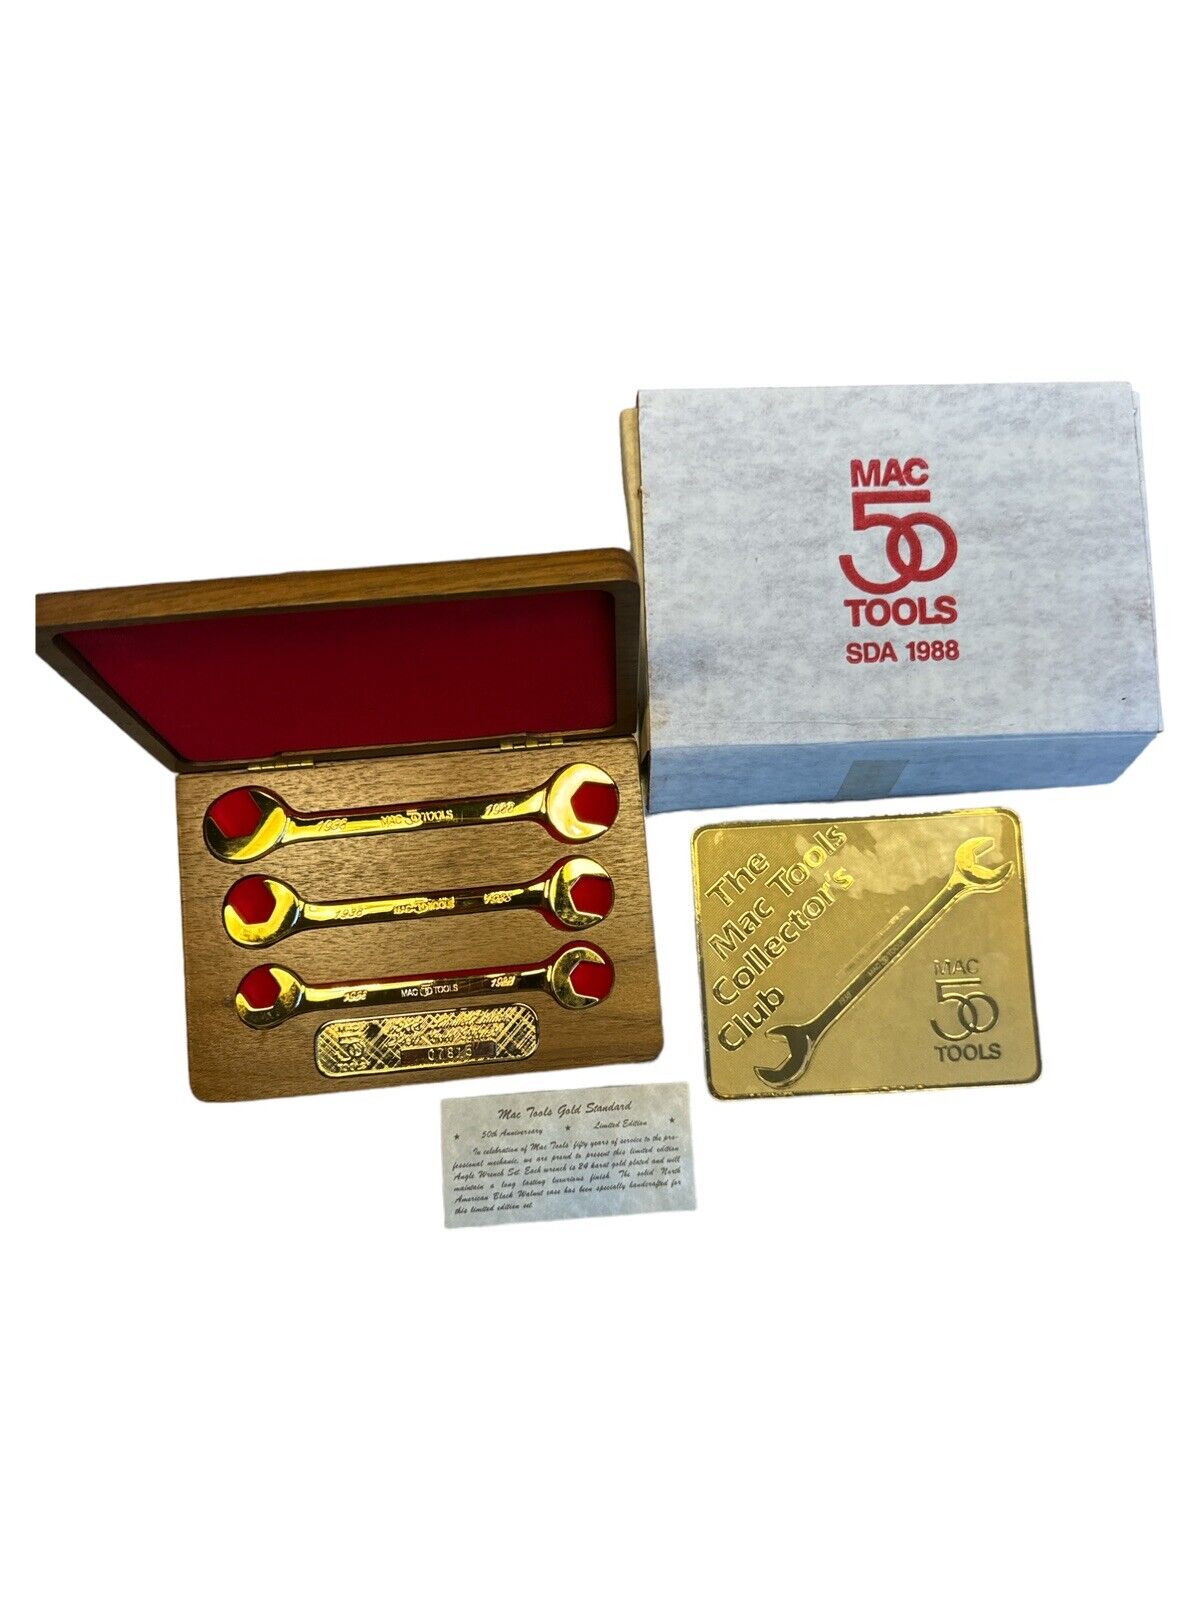 Mac Tools SDA 1988 3 Offset Wrench Set 24k Gold Plated Limited Edition #01684